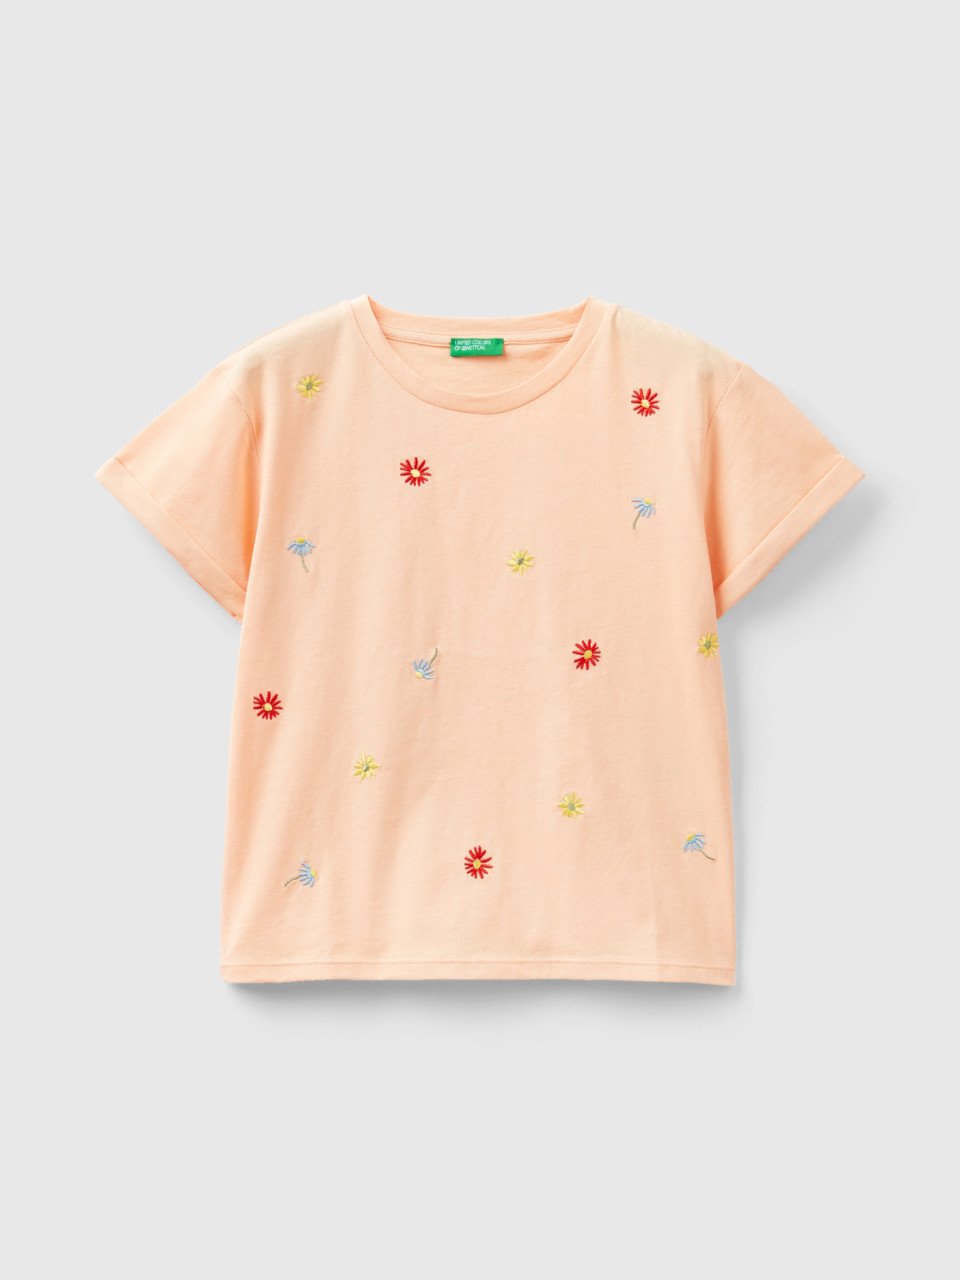 Benetton, T-shirt With Embroidered Flowers, Peach, Kids